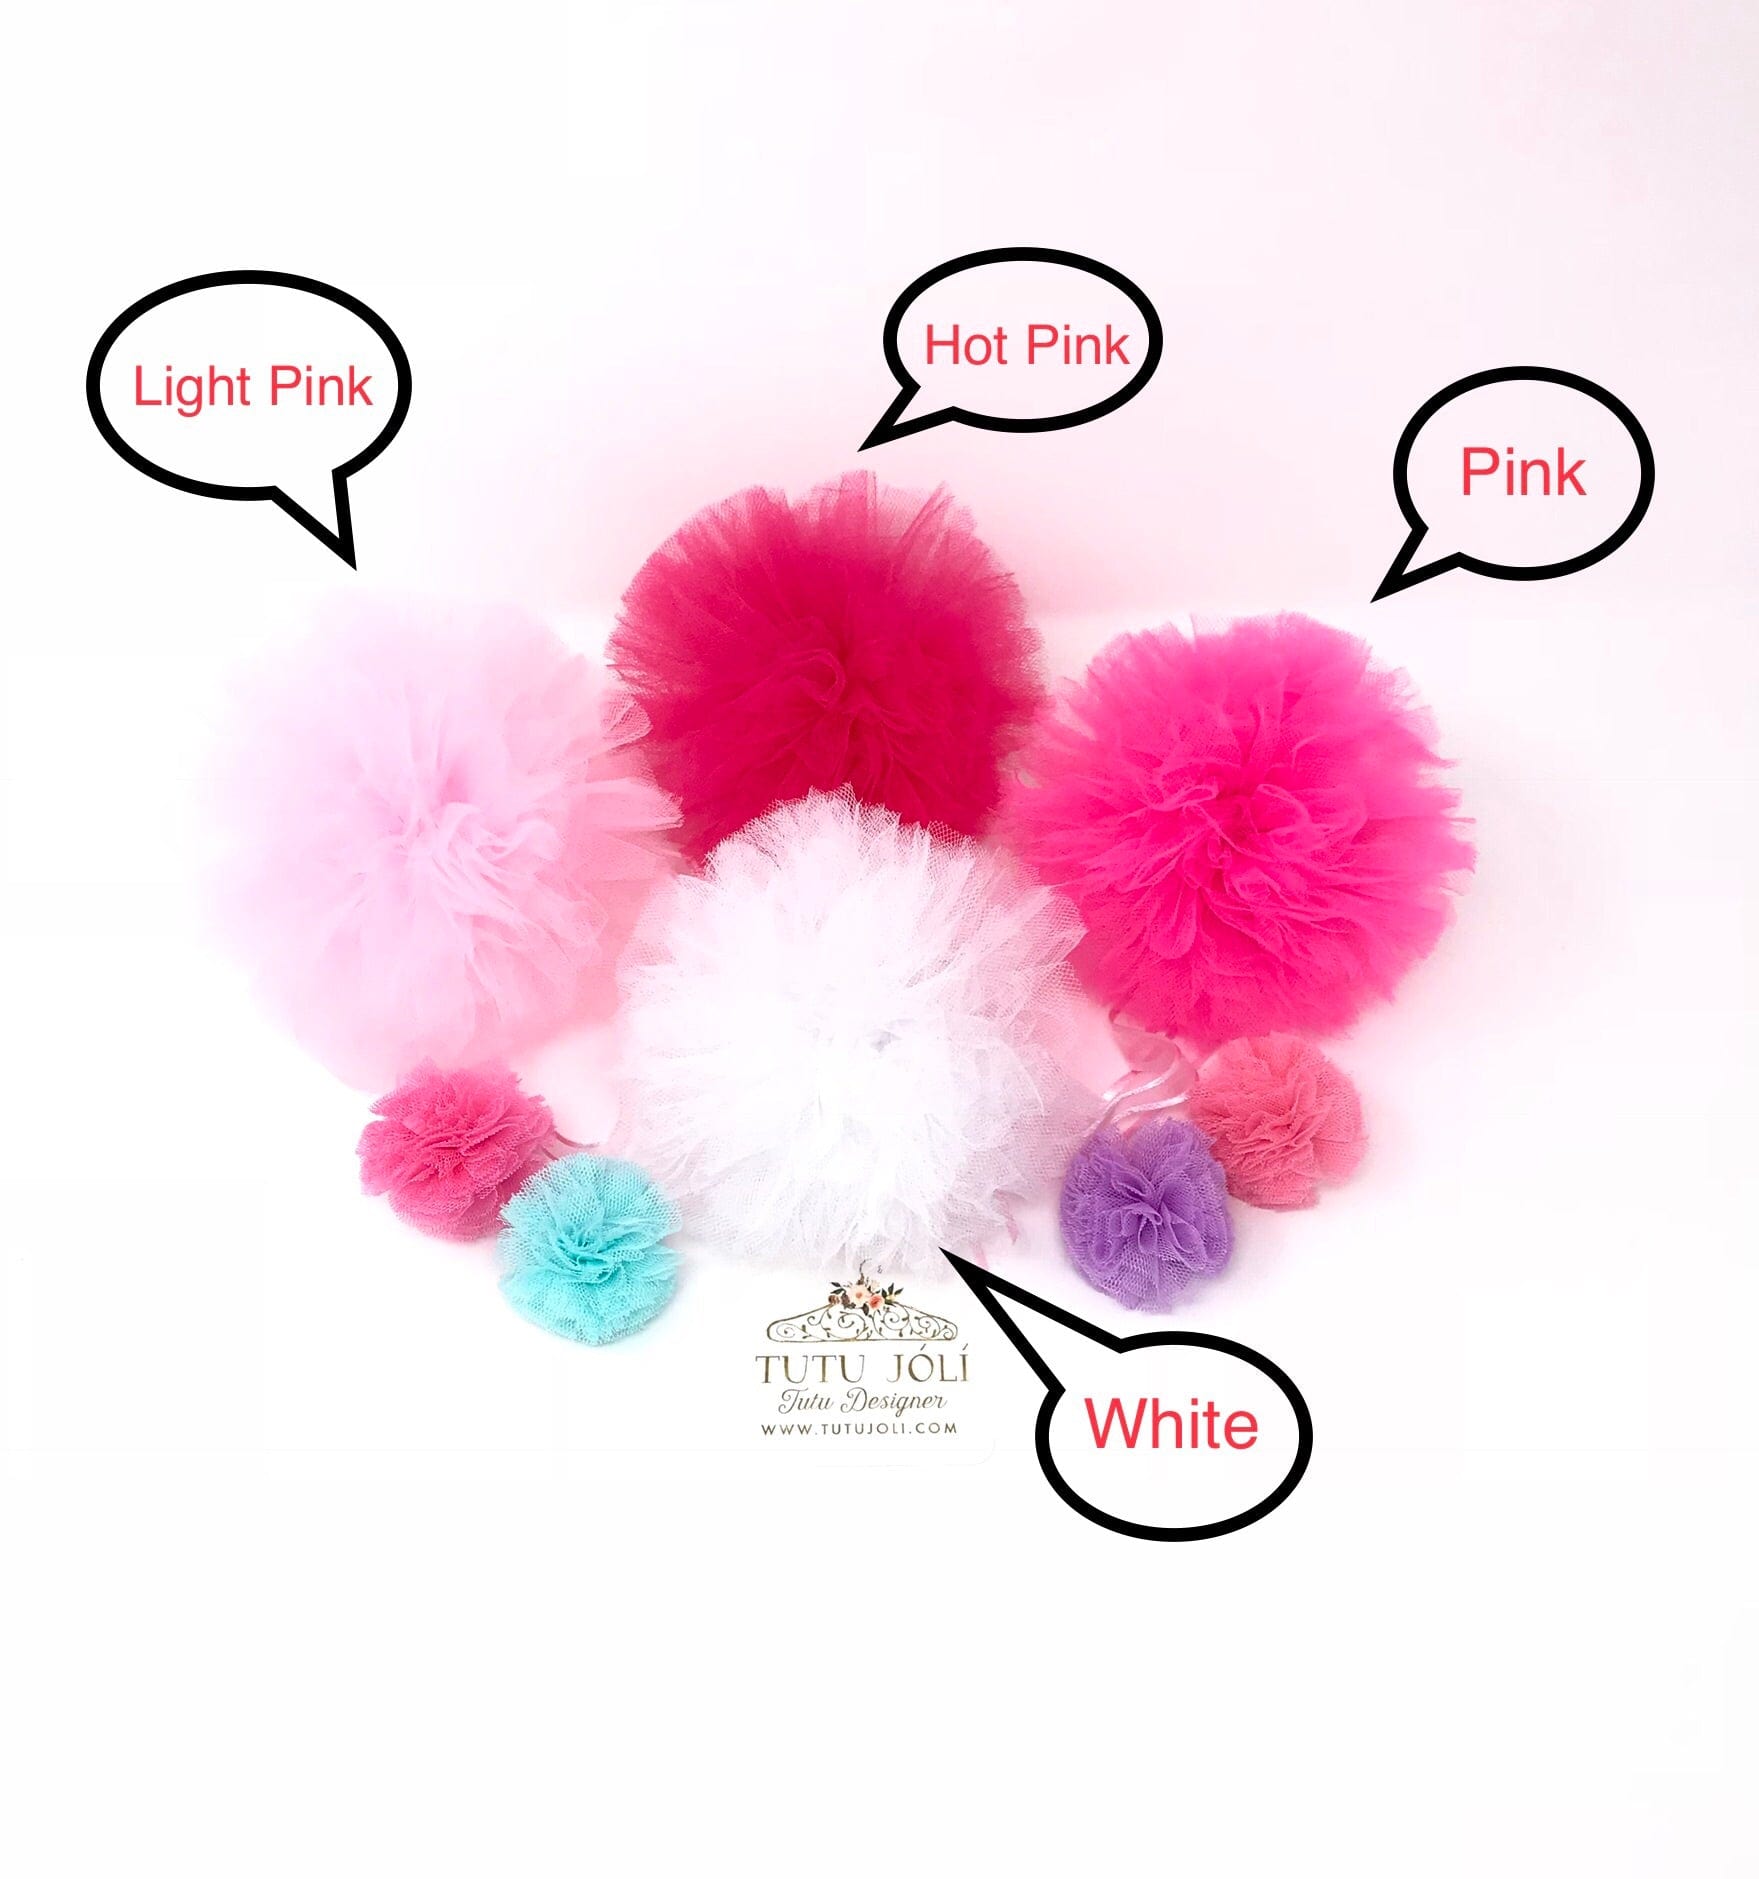 Large Hot Pink Poms, Hot Pink Party Decor